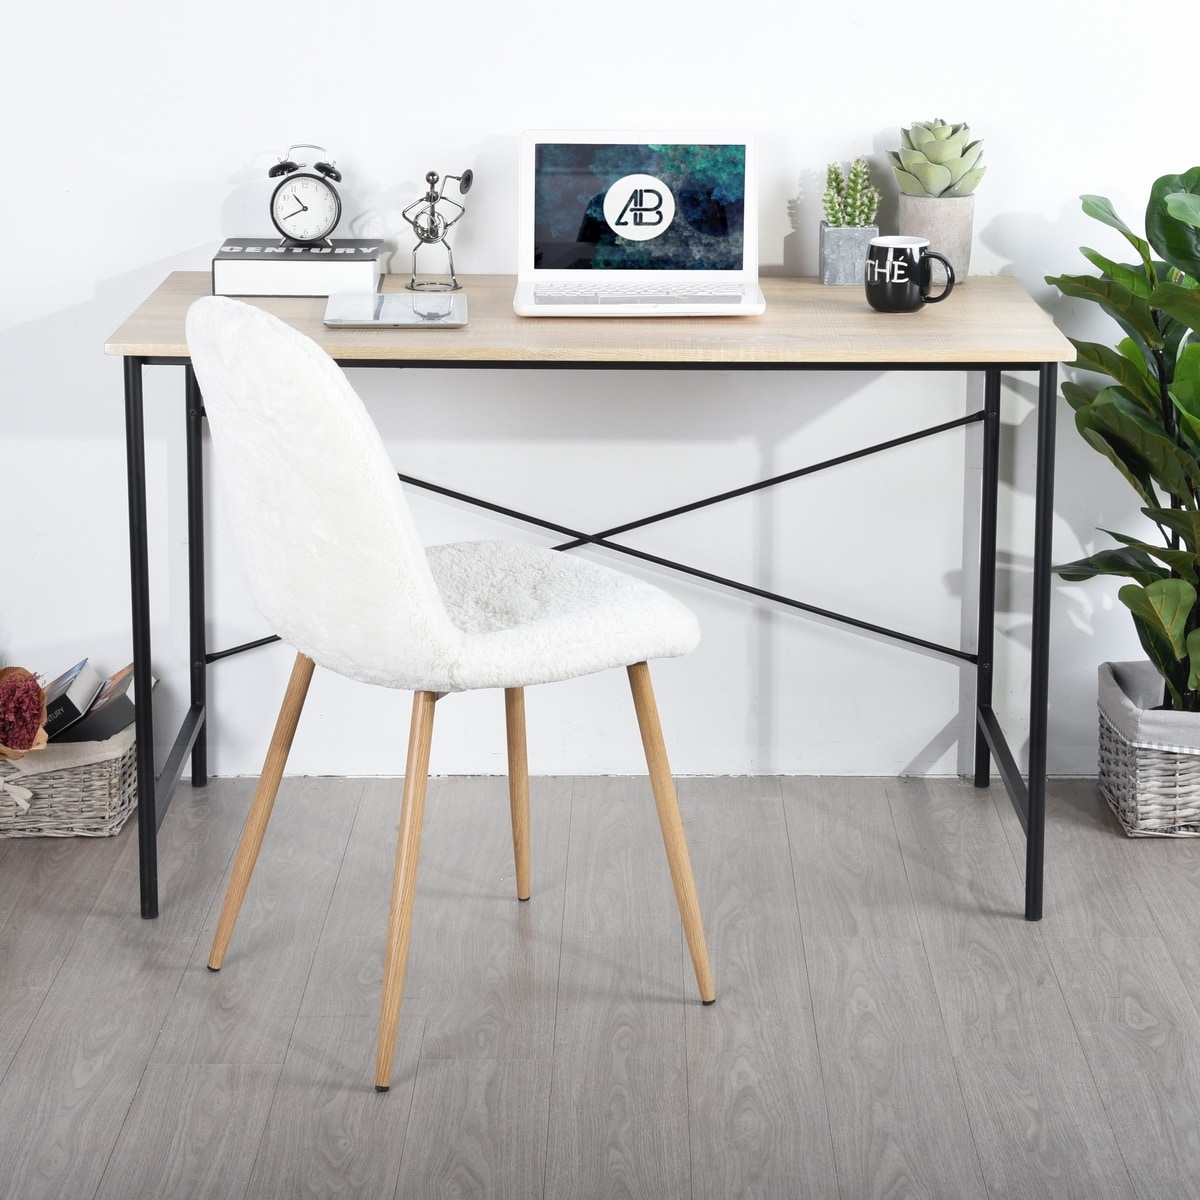 Elegant Wooden Study Table for a Home Office